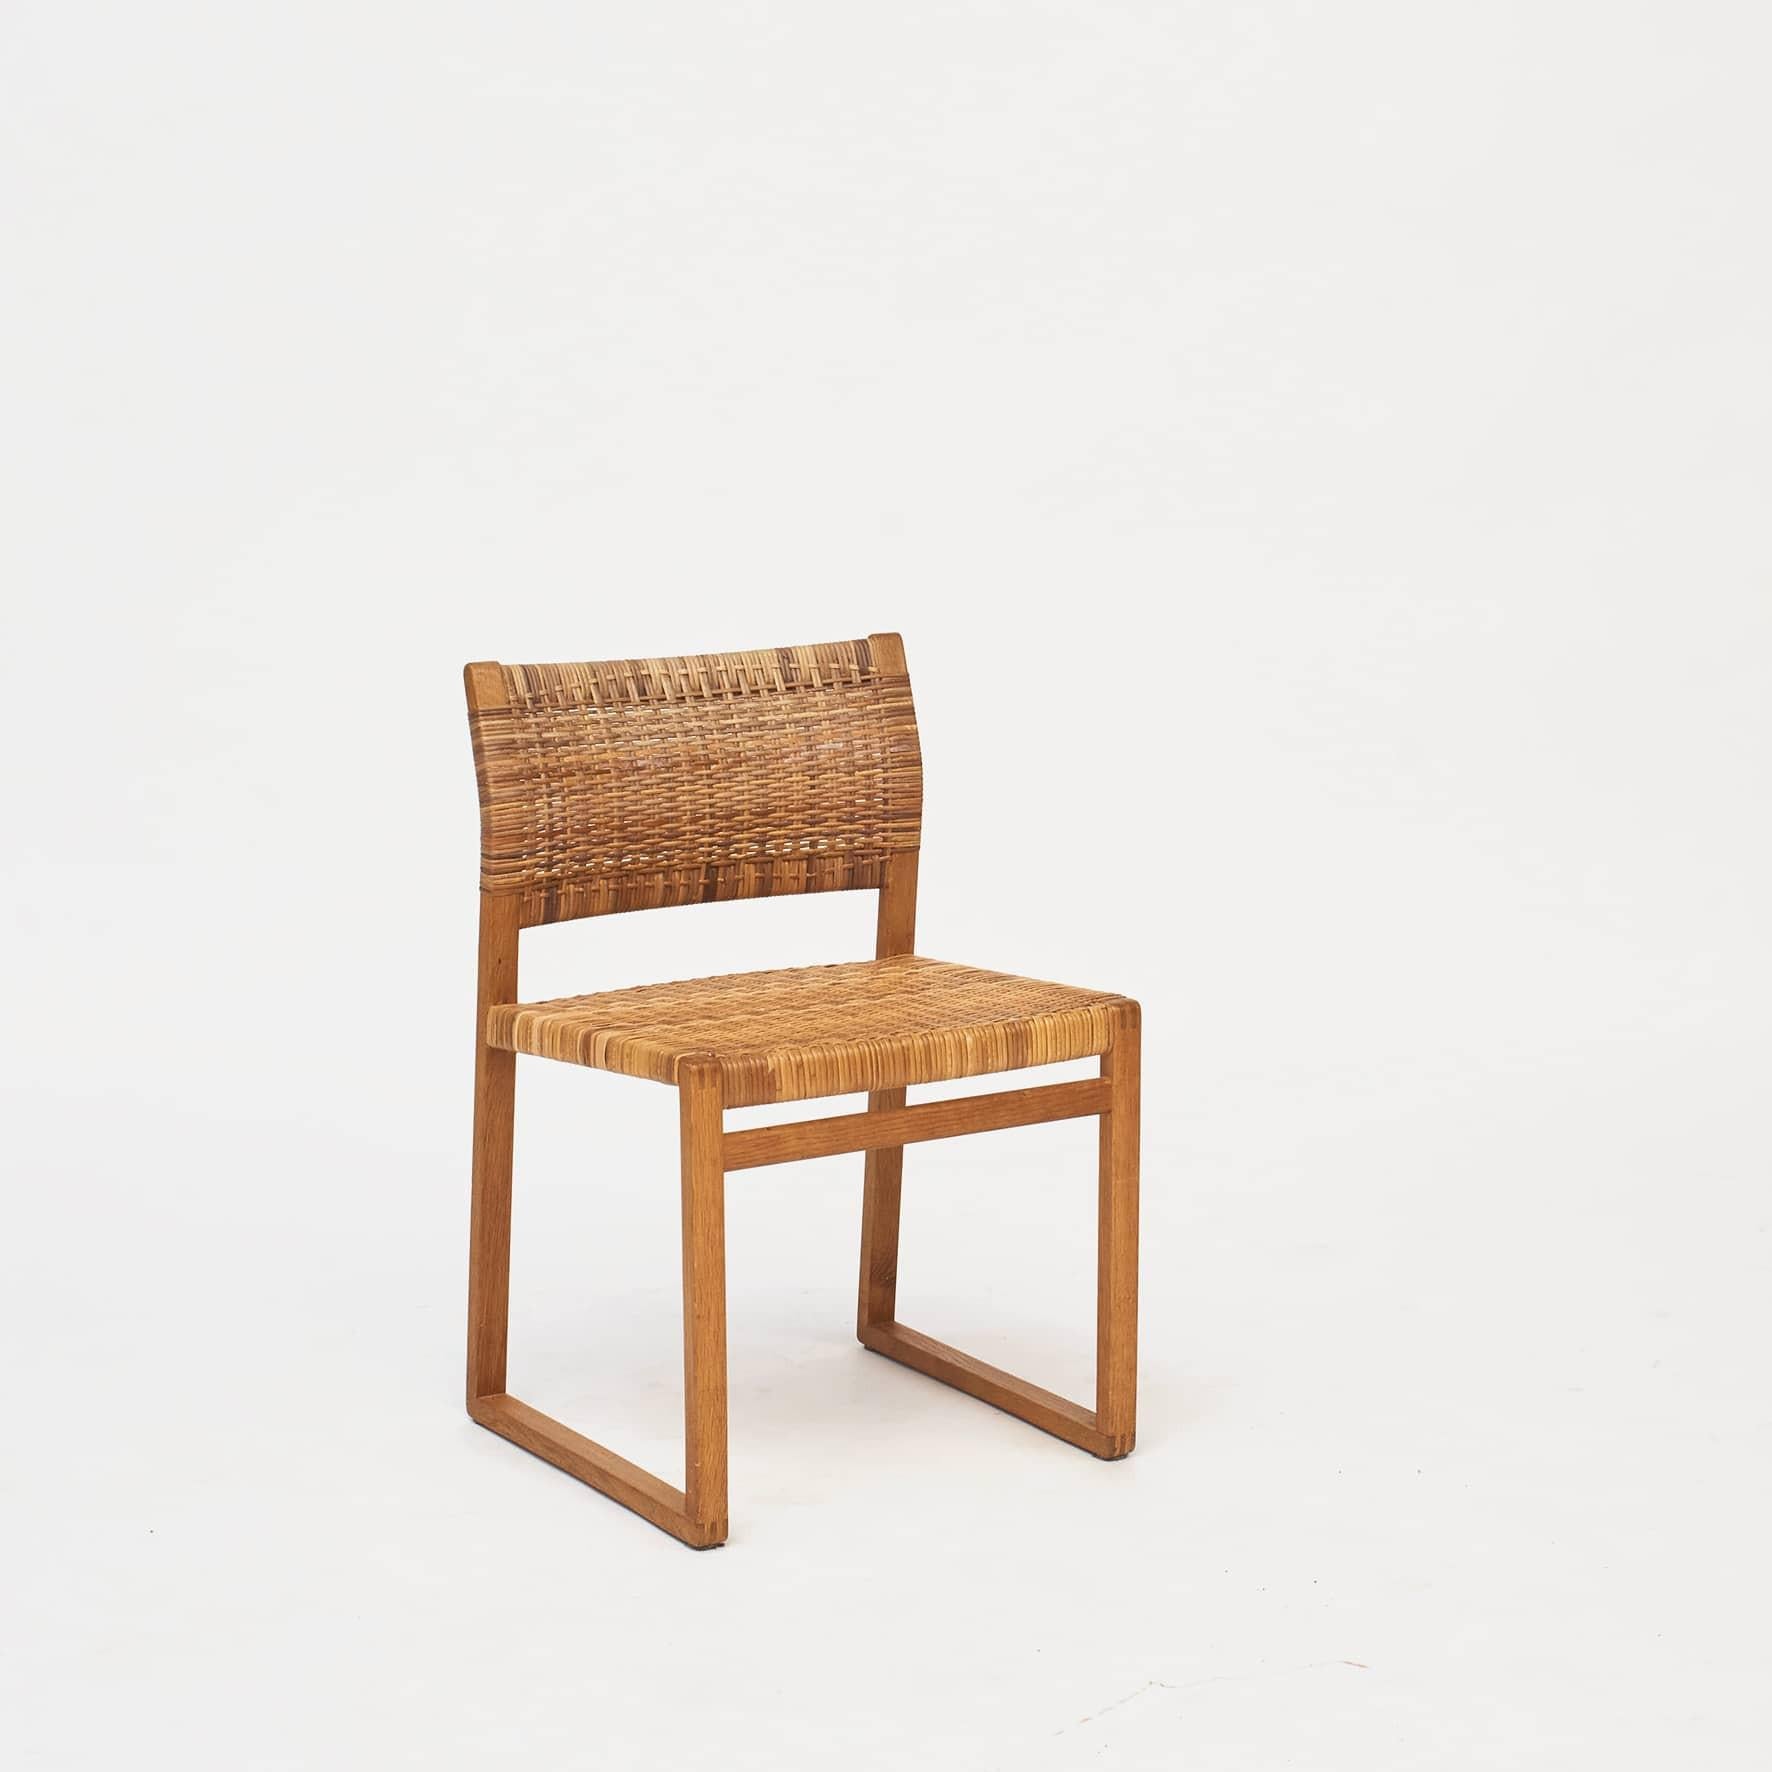 Børge Mogensen 1914-1972.
Pair of dinning chairs, model BM61.
Made of solid oak with original woven cane wicker in seat and backrest.

Designed by Børge Mogensen and manufactured by Frederica Stolefabrik in c. 1960.

Good untouched condition with a